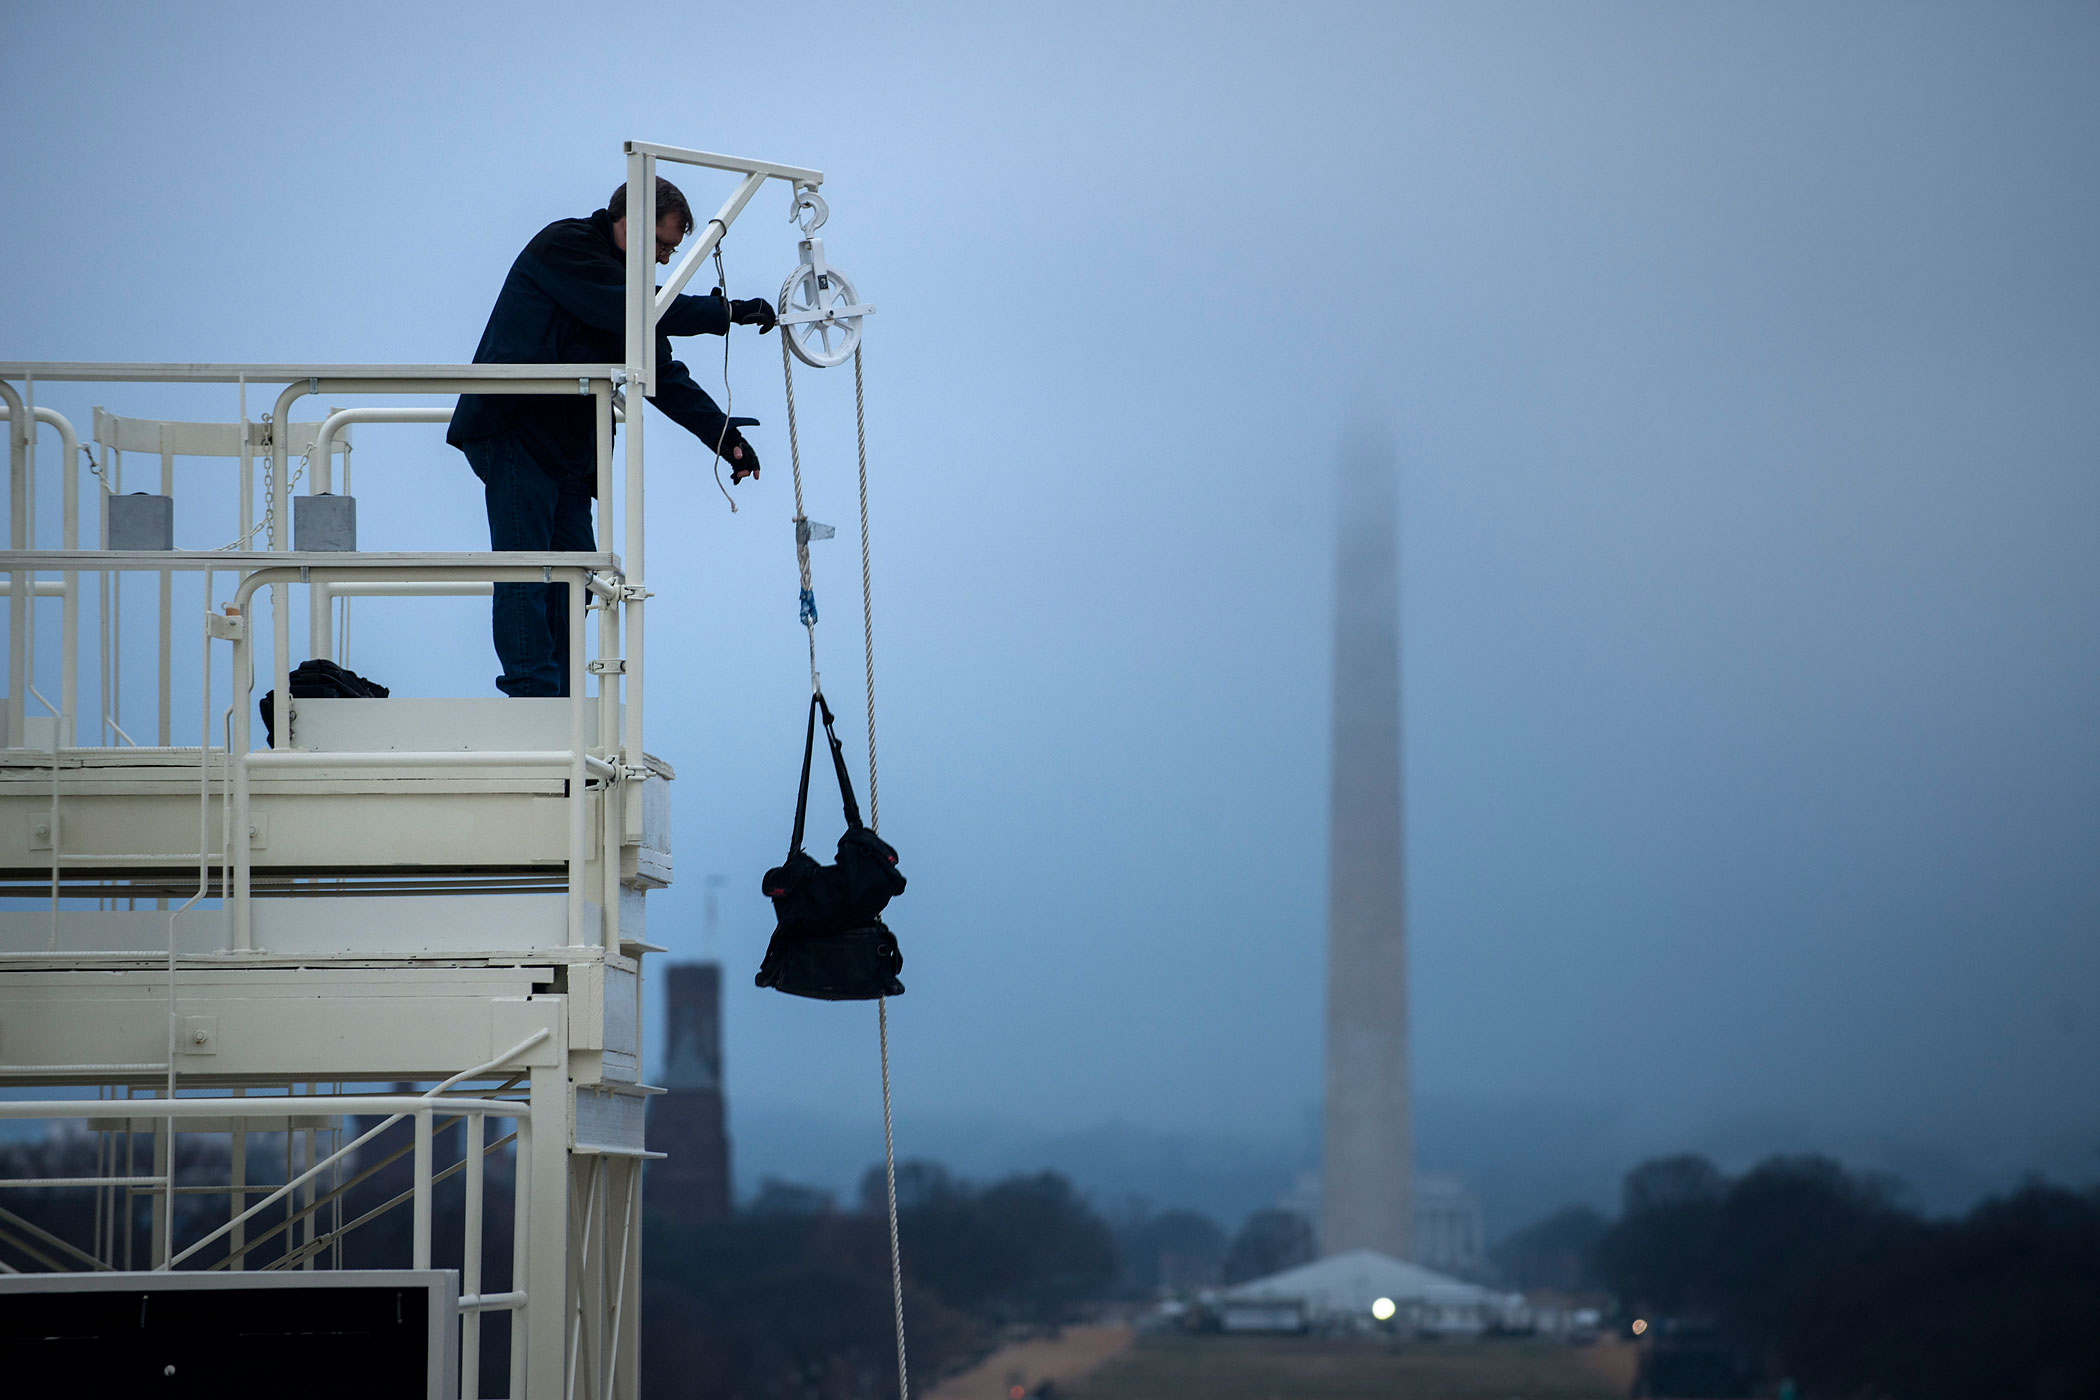 Jan. 13, 2013. A worker uses a pulley to bring a bag to the top of a camera tower before an inauguration rehearsal on Capitol Hill in Washington.